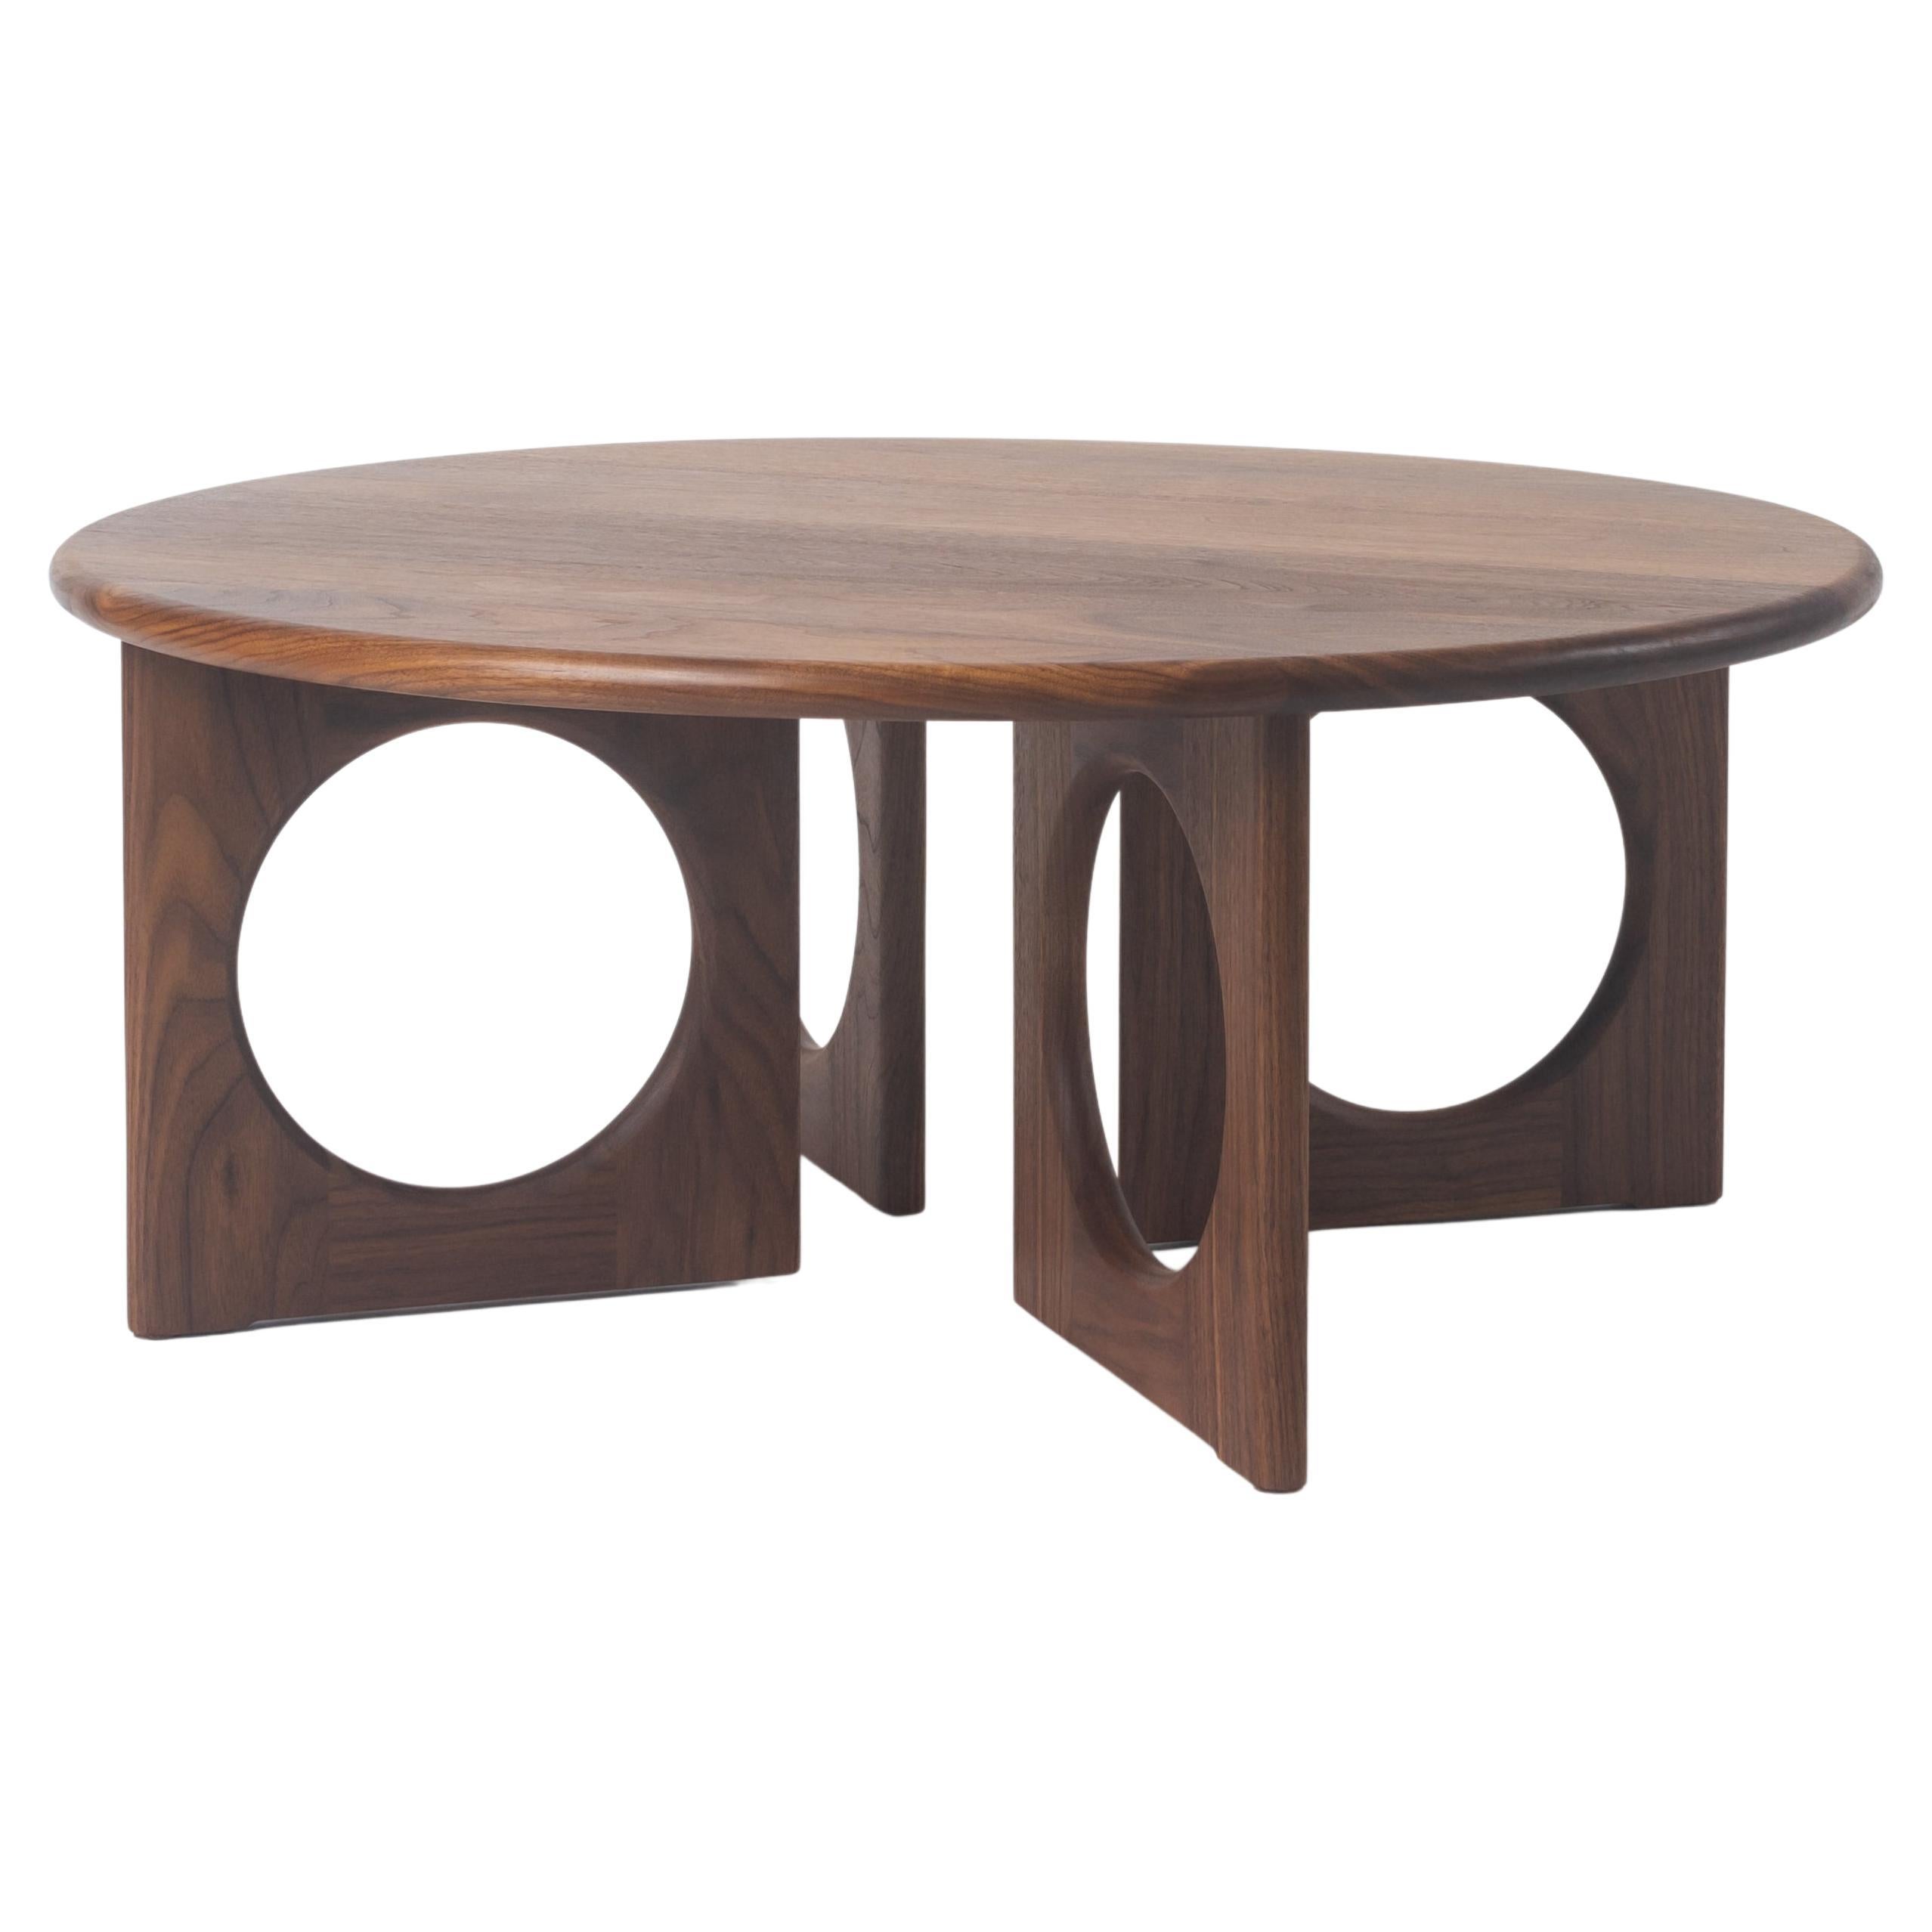 Porthole Low Table, Handcrafted Solid Wood Coffee Table For Sale